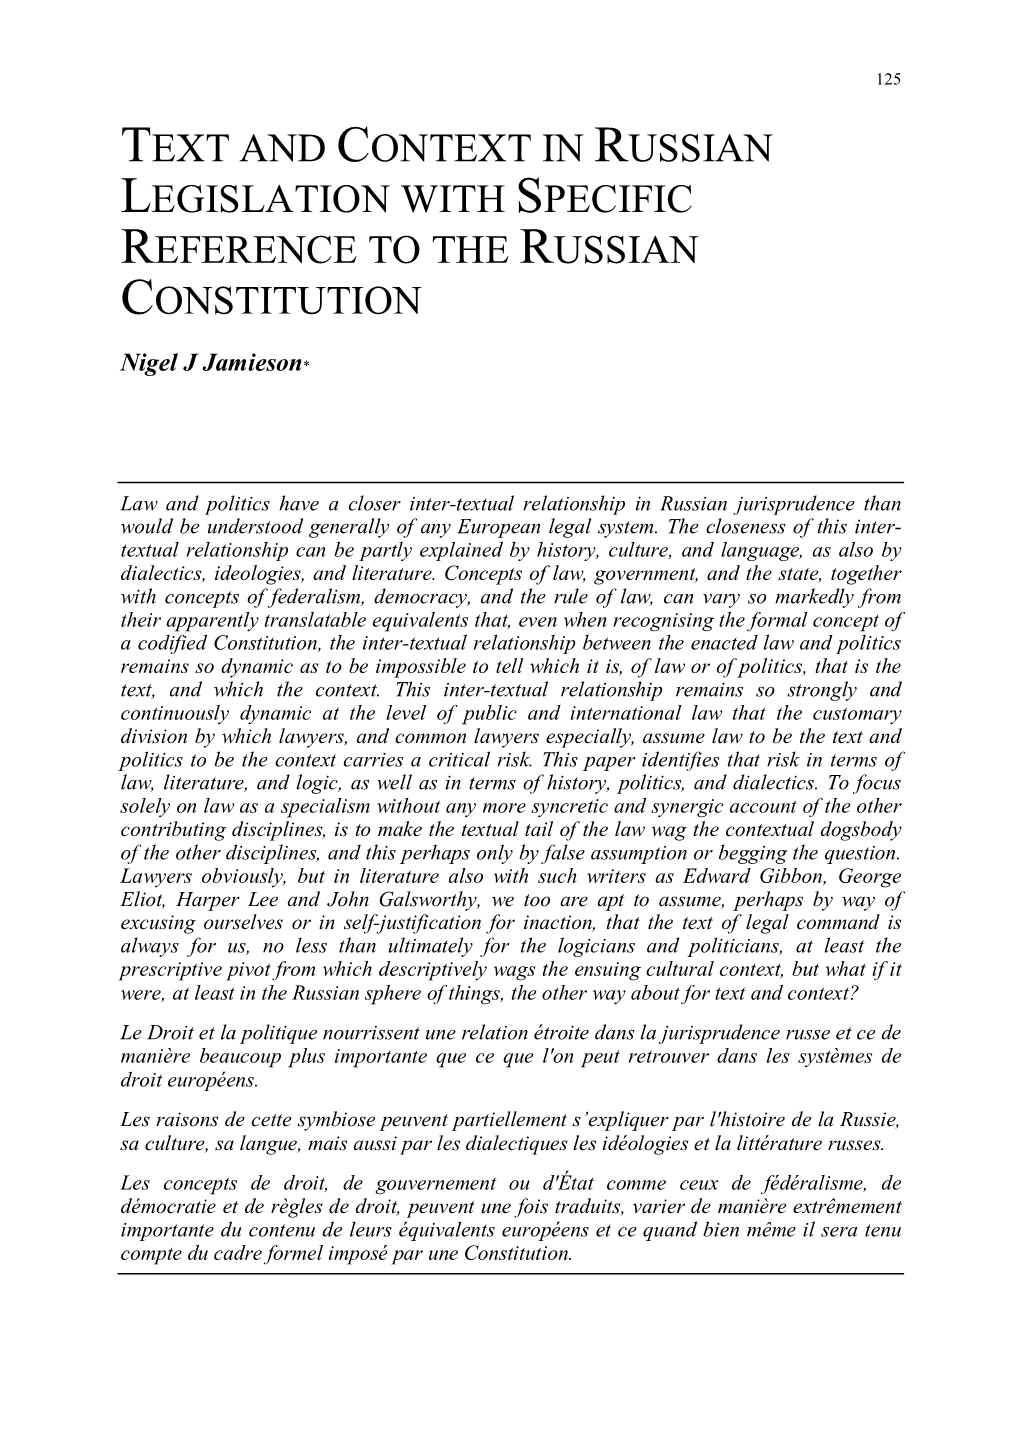 Text and Context in Russian Legislation with Specific Reference to the Russian Constitution